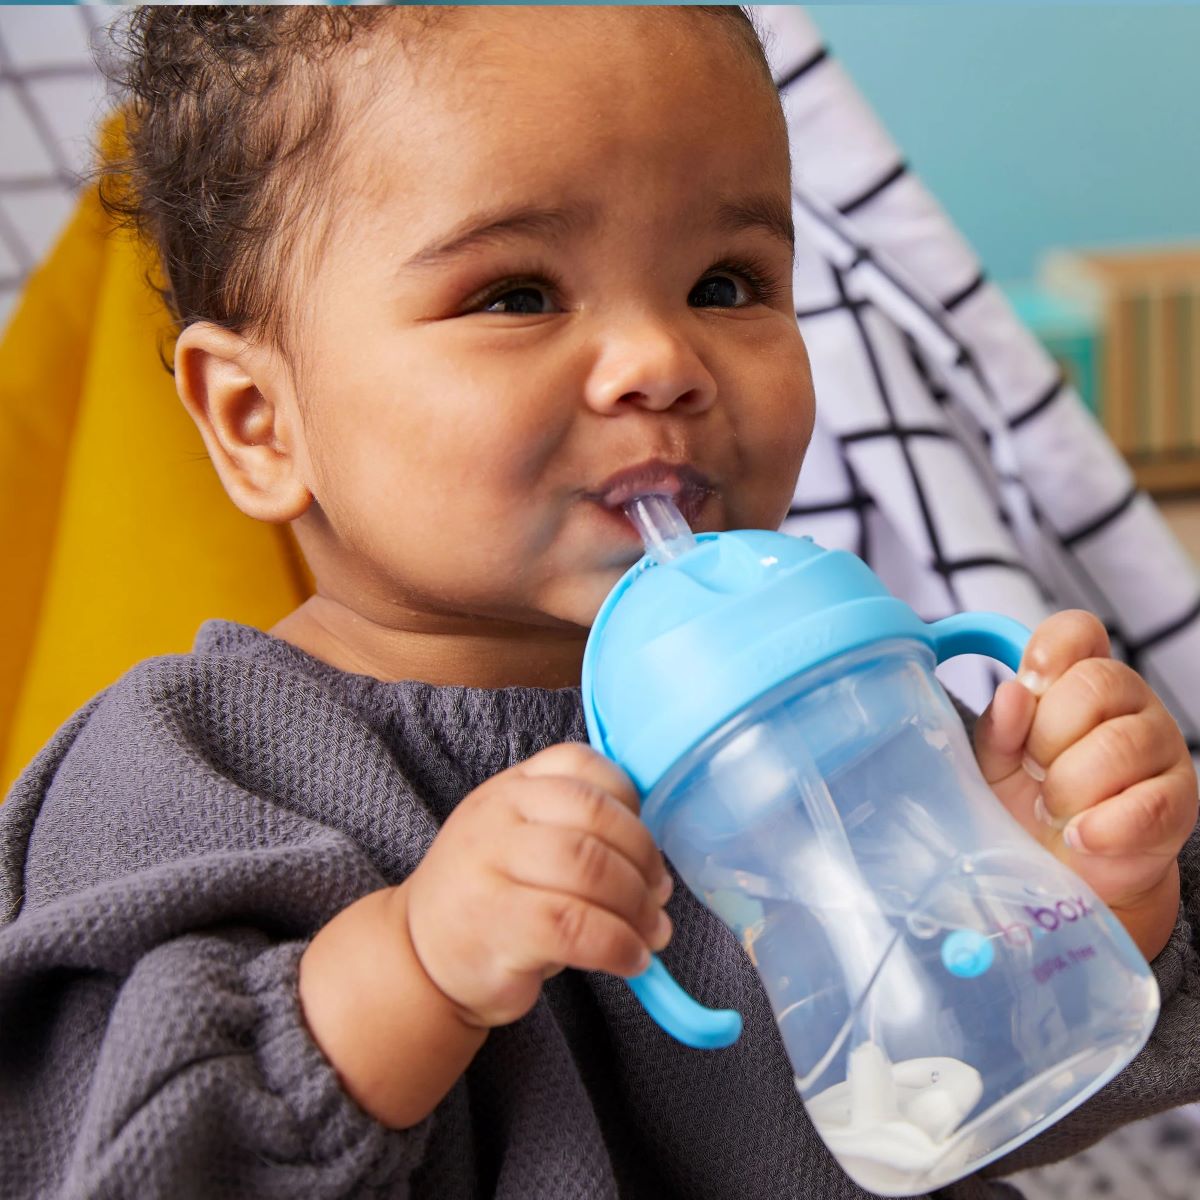 What Do You Put In A Sippy Cup For A 6-Month Old?